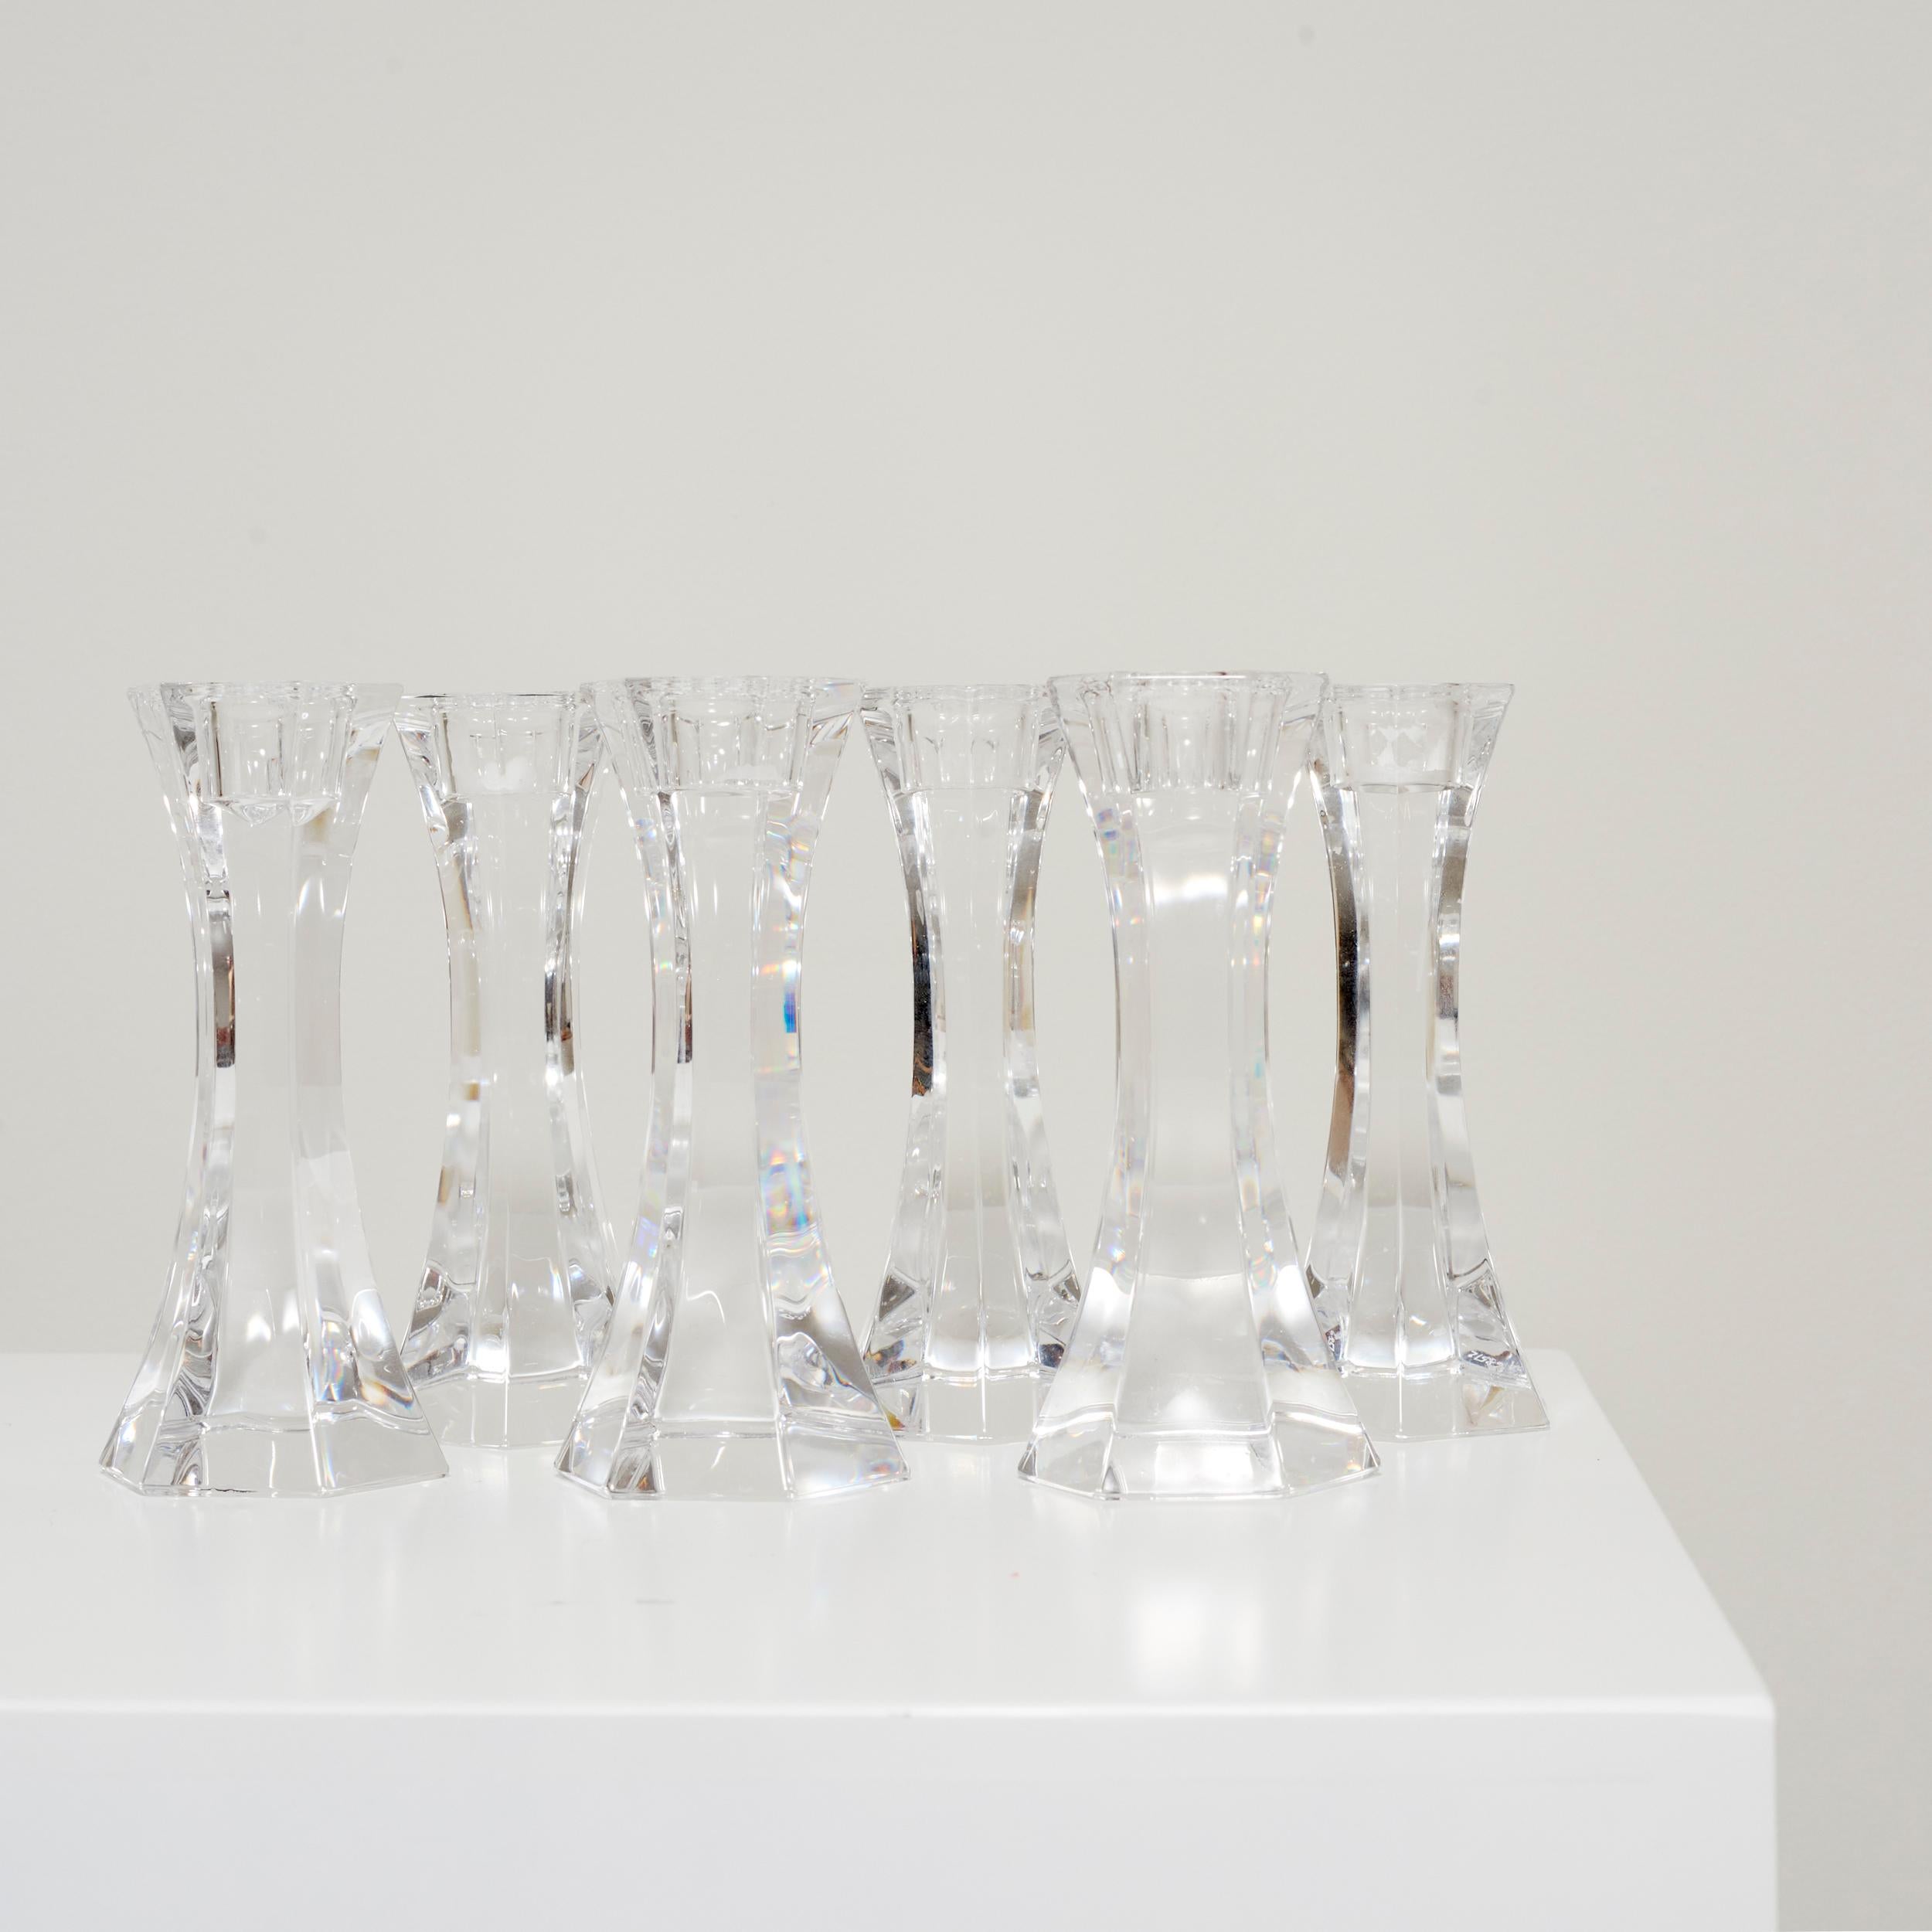 1960s Bengt Edenfalk for kosta Boda
Crystal Candleholders designed by Bengt Edenfalk for kosta Boda. Sweden, 1960’s. They present a versatile Hexagonal shape that is perfect for different decorative arrangements, Also the faceted crystal plays